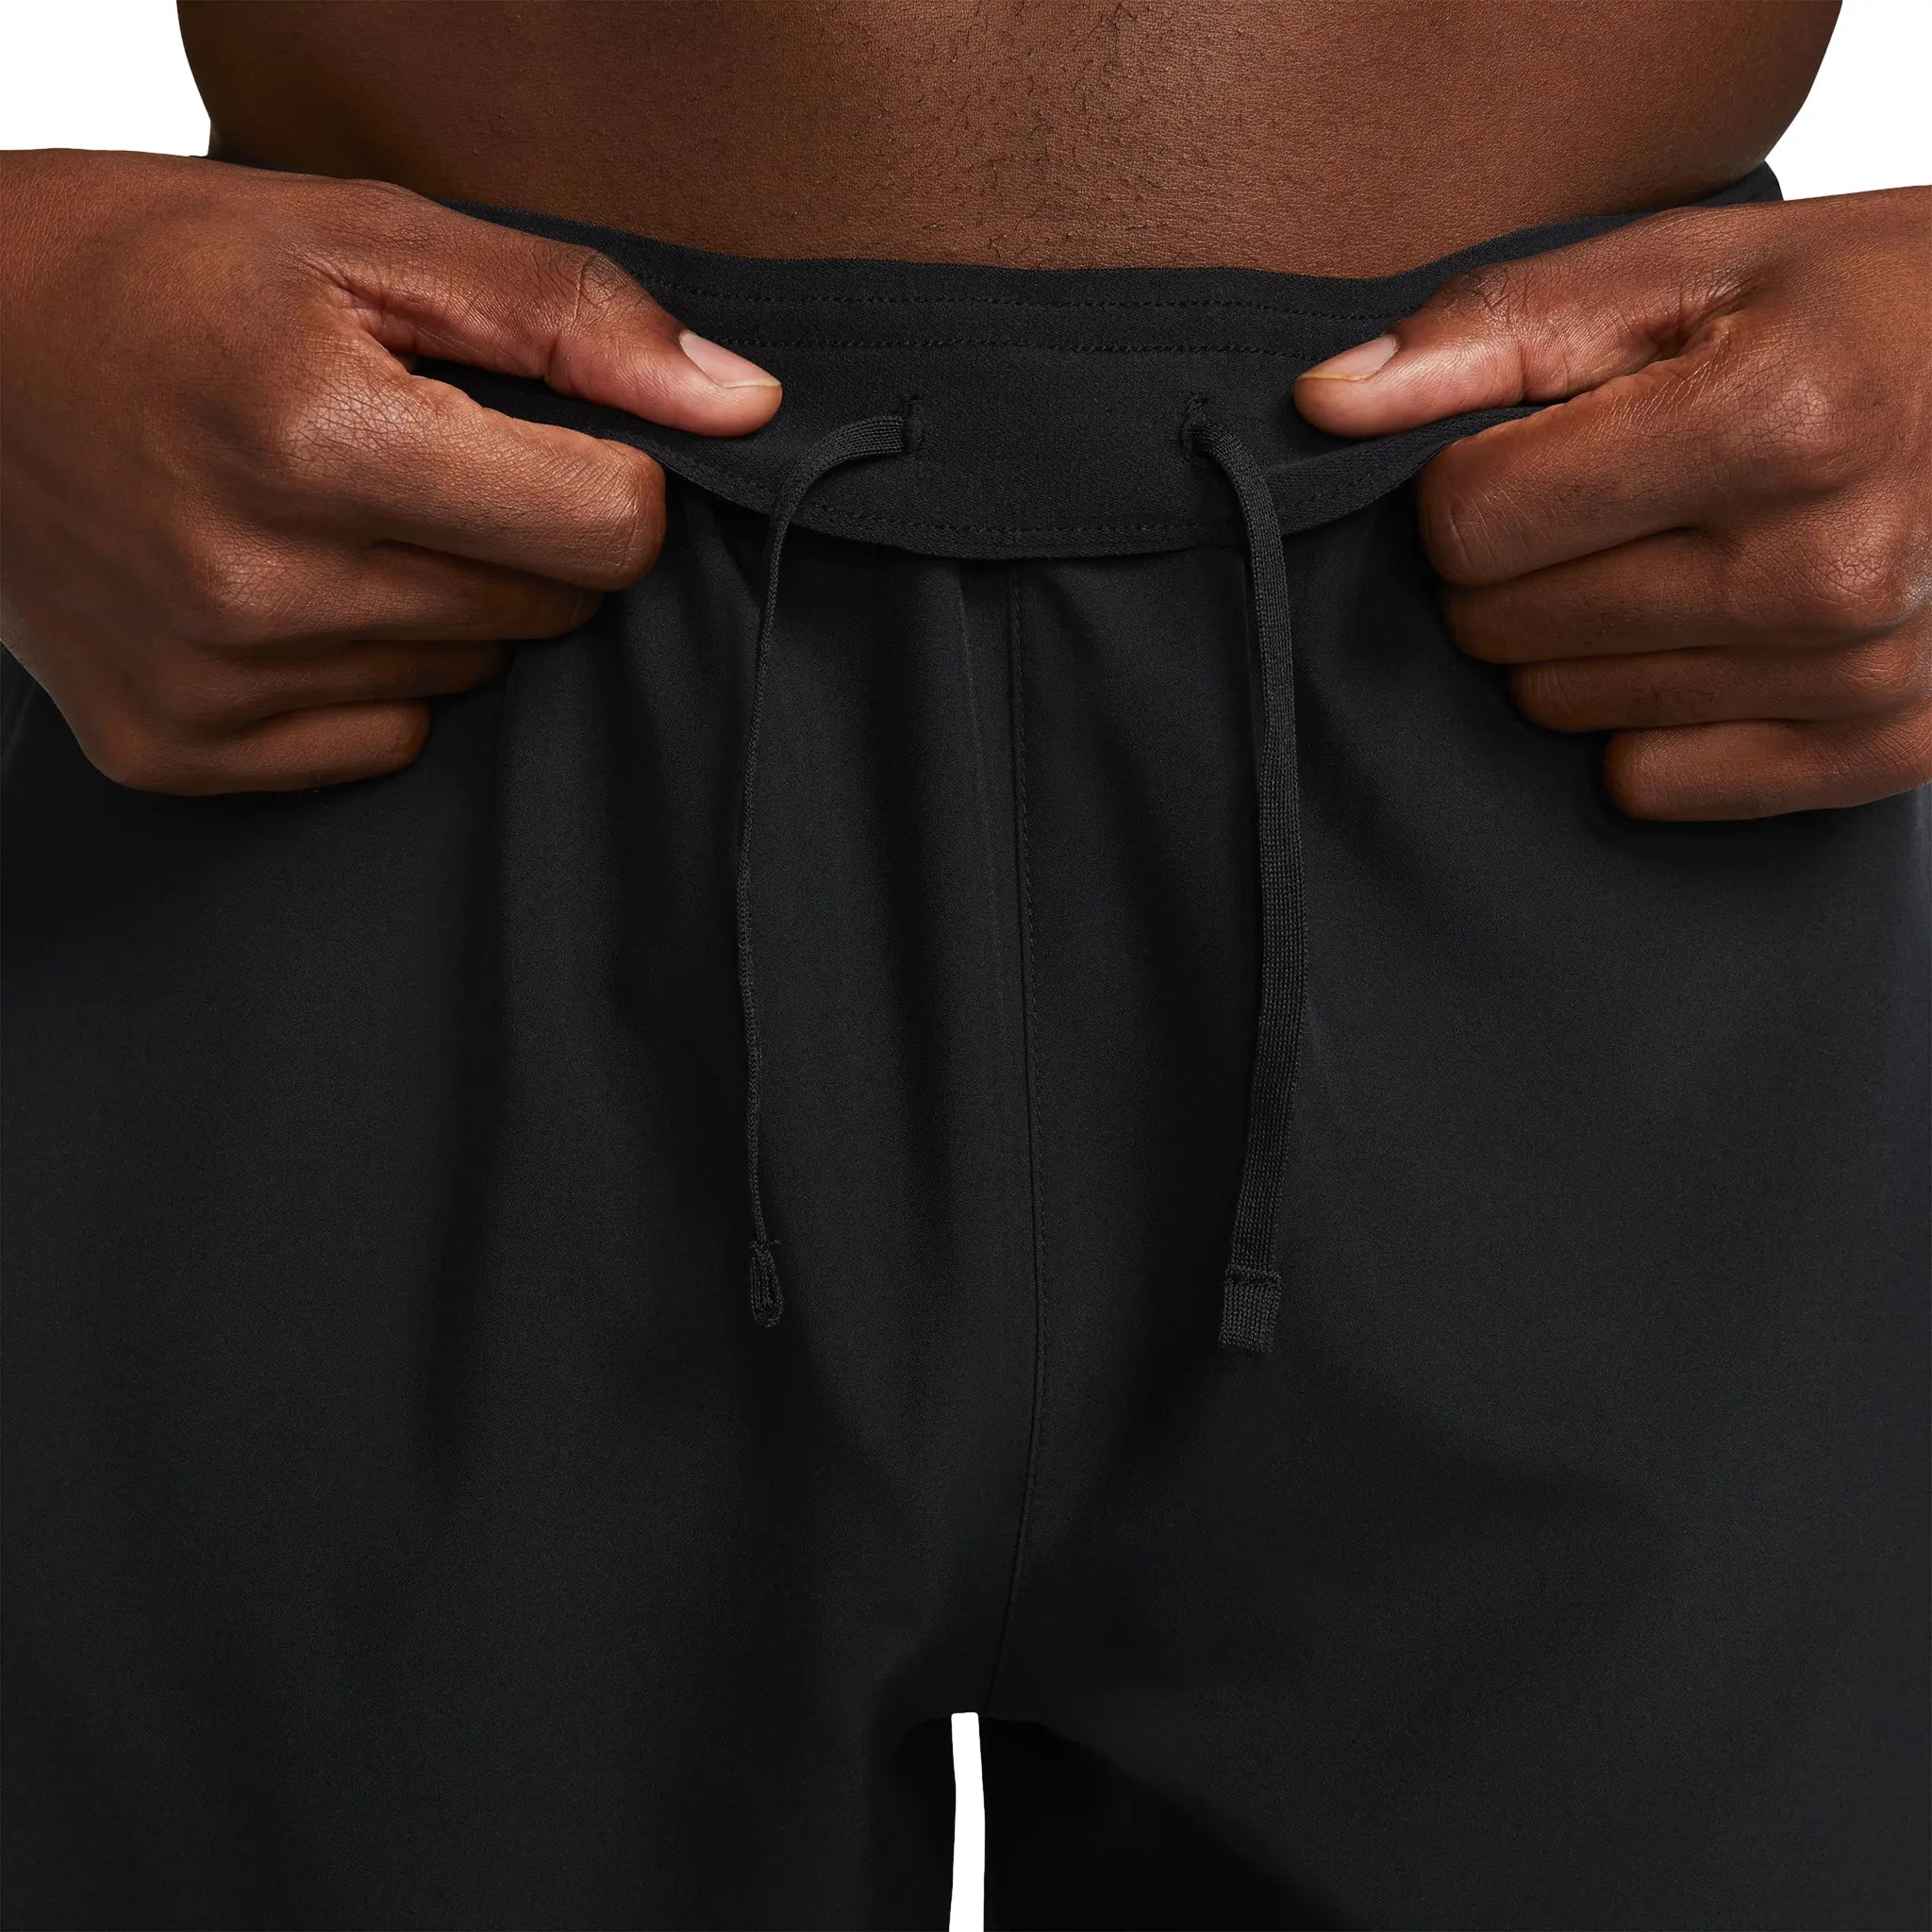 Model waist view of Nike Challenger 7-Inch Black Shorts CZ9067-010